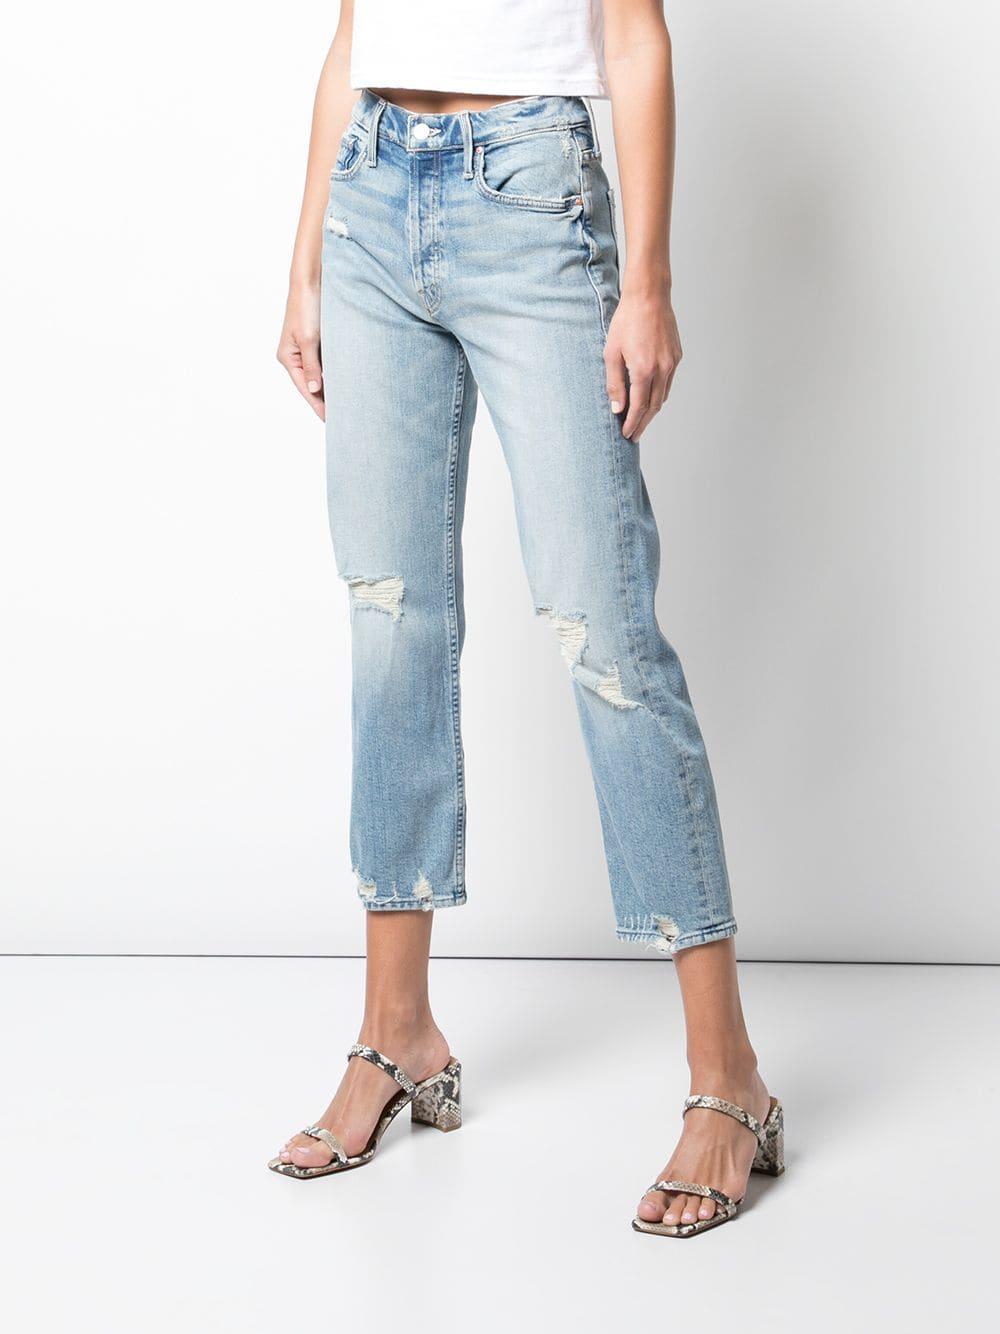 Mother Denim Tomcat Cropped Jeans in Blue - Lyst